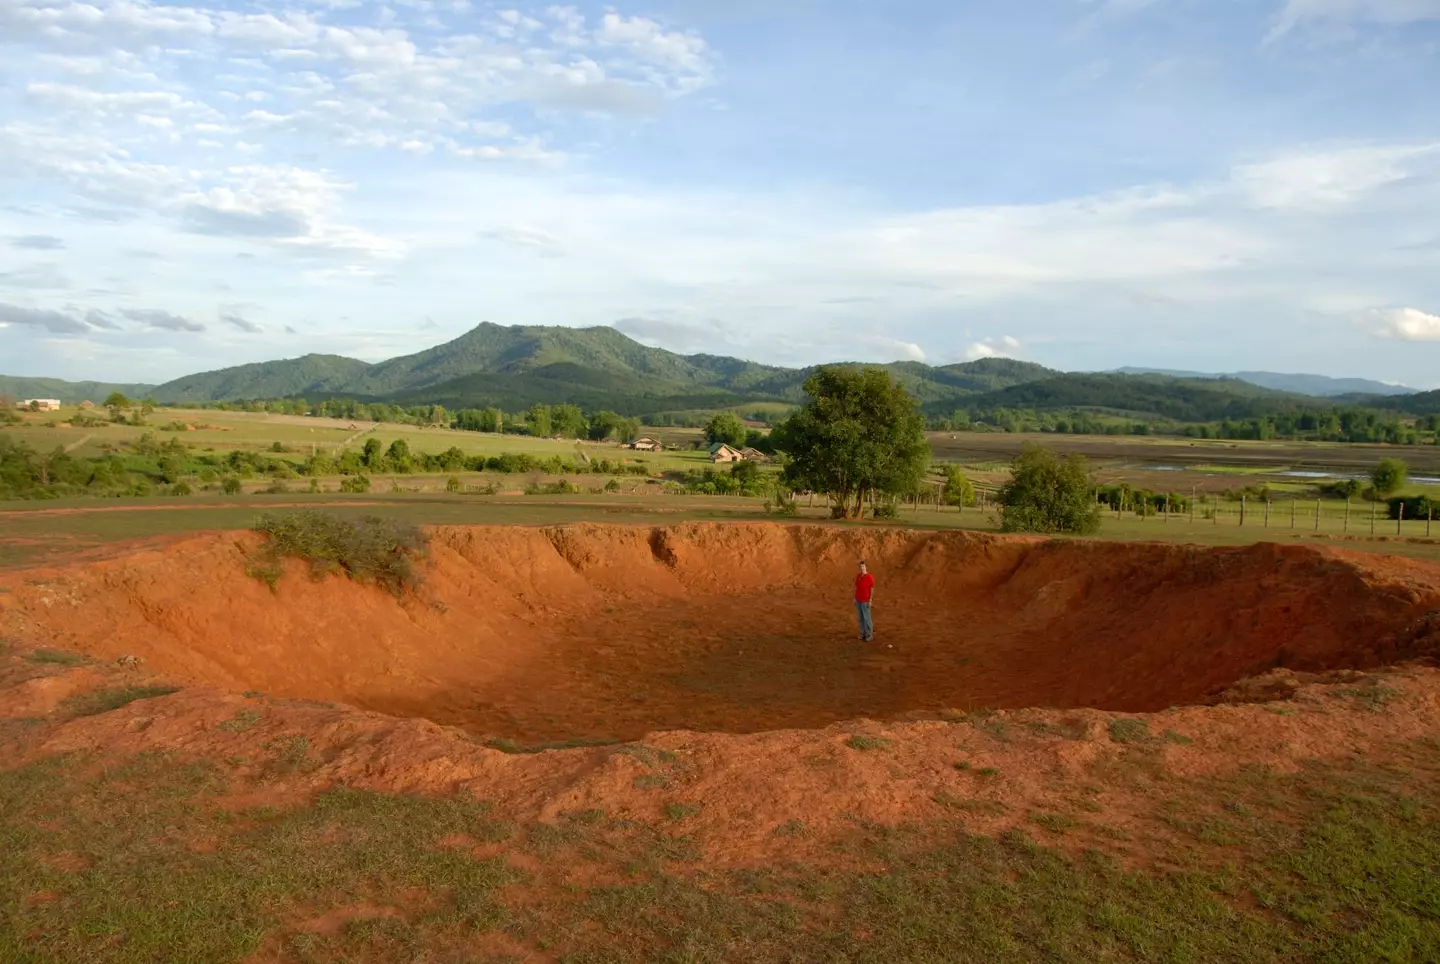 Large bomb crater from the Vietnam War in Ban Khai, Laos.